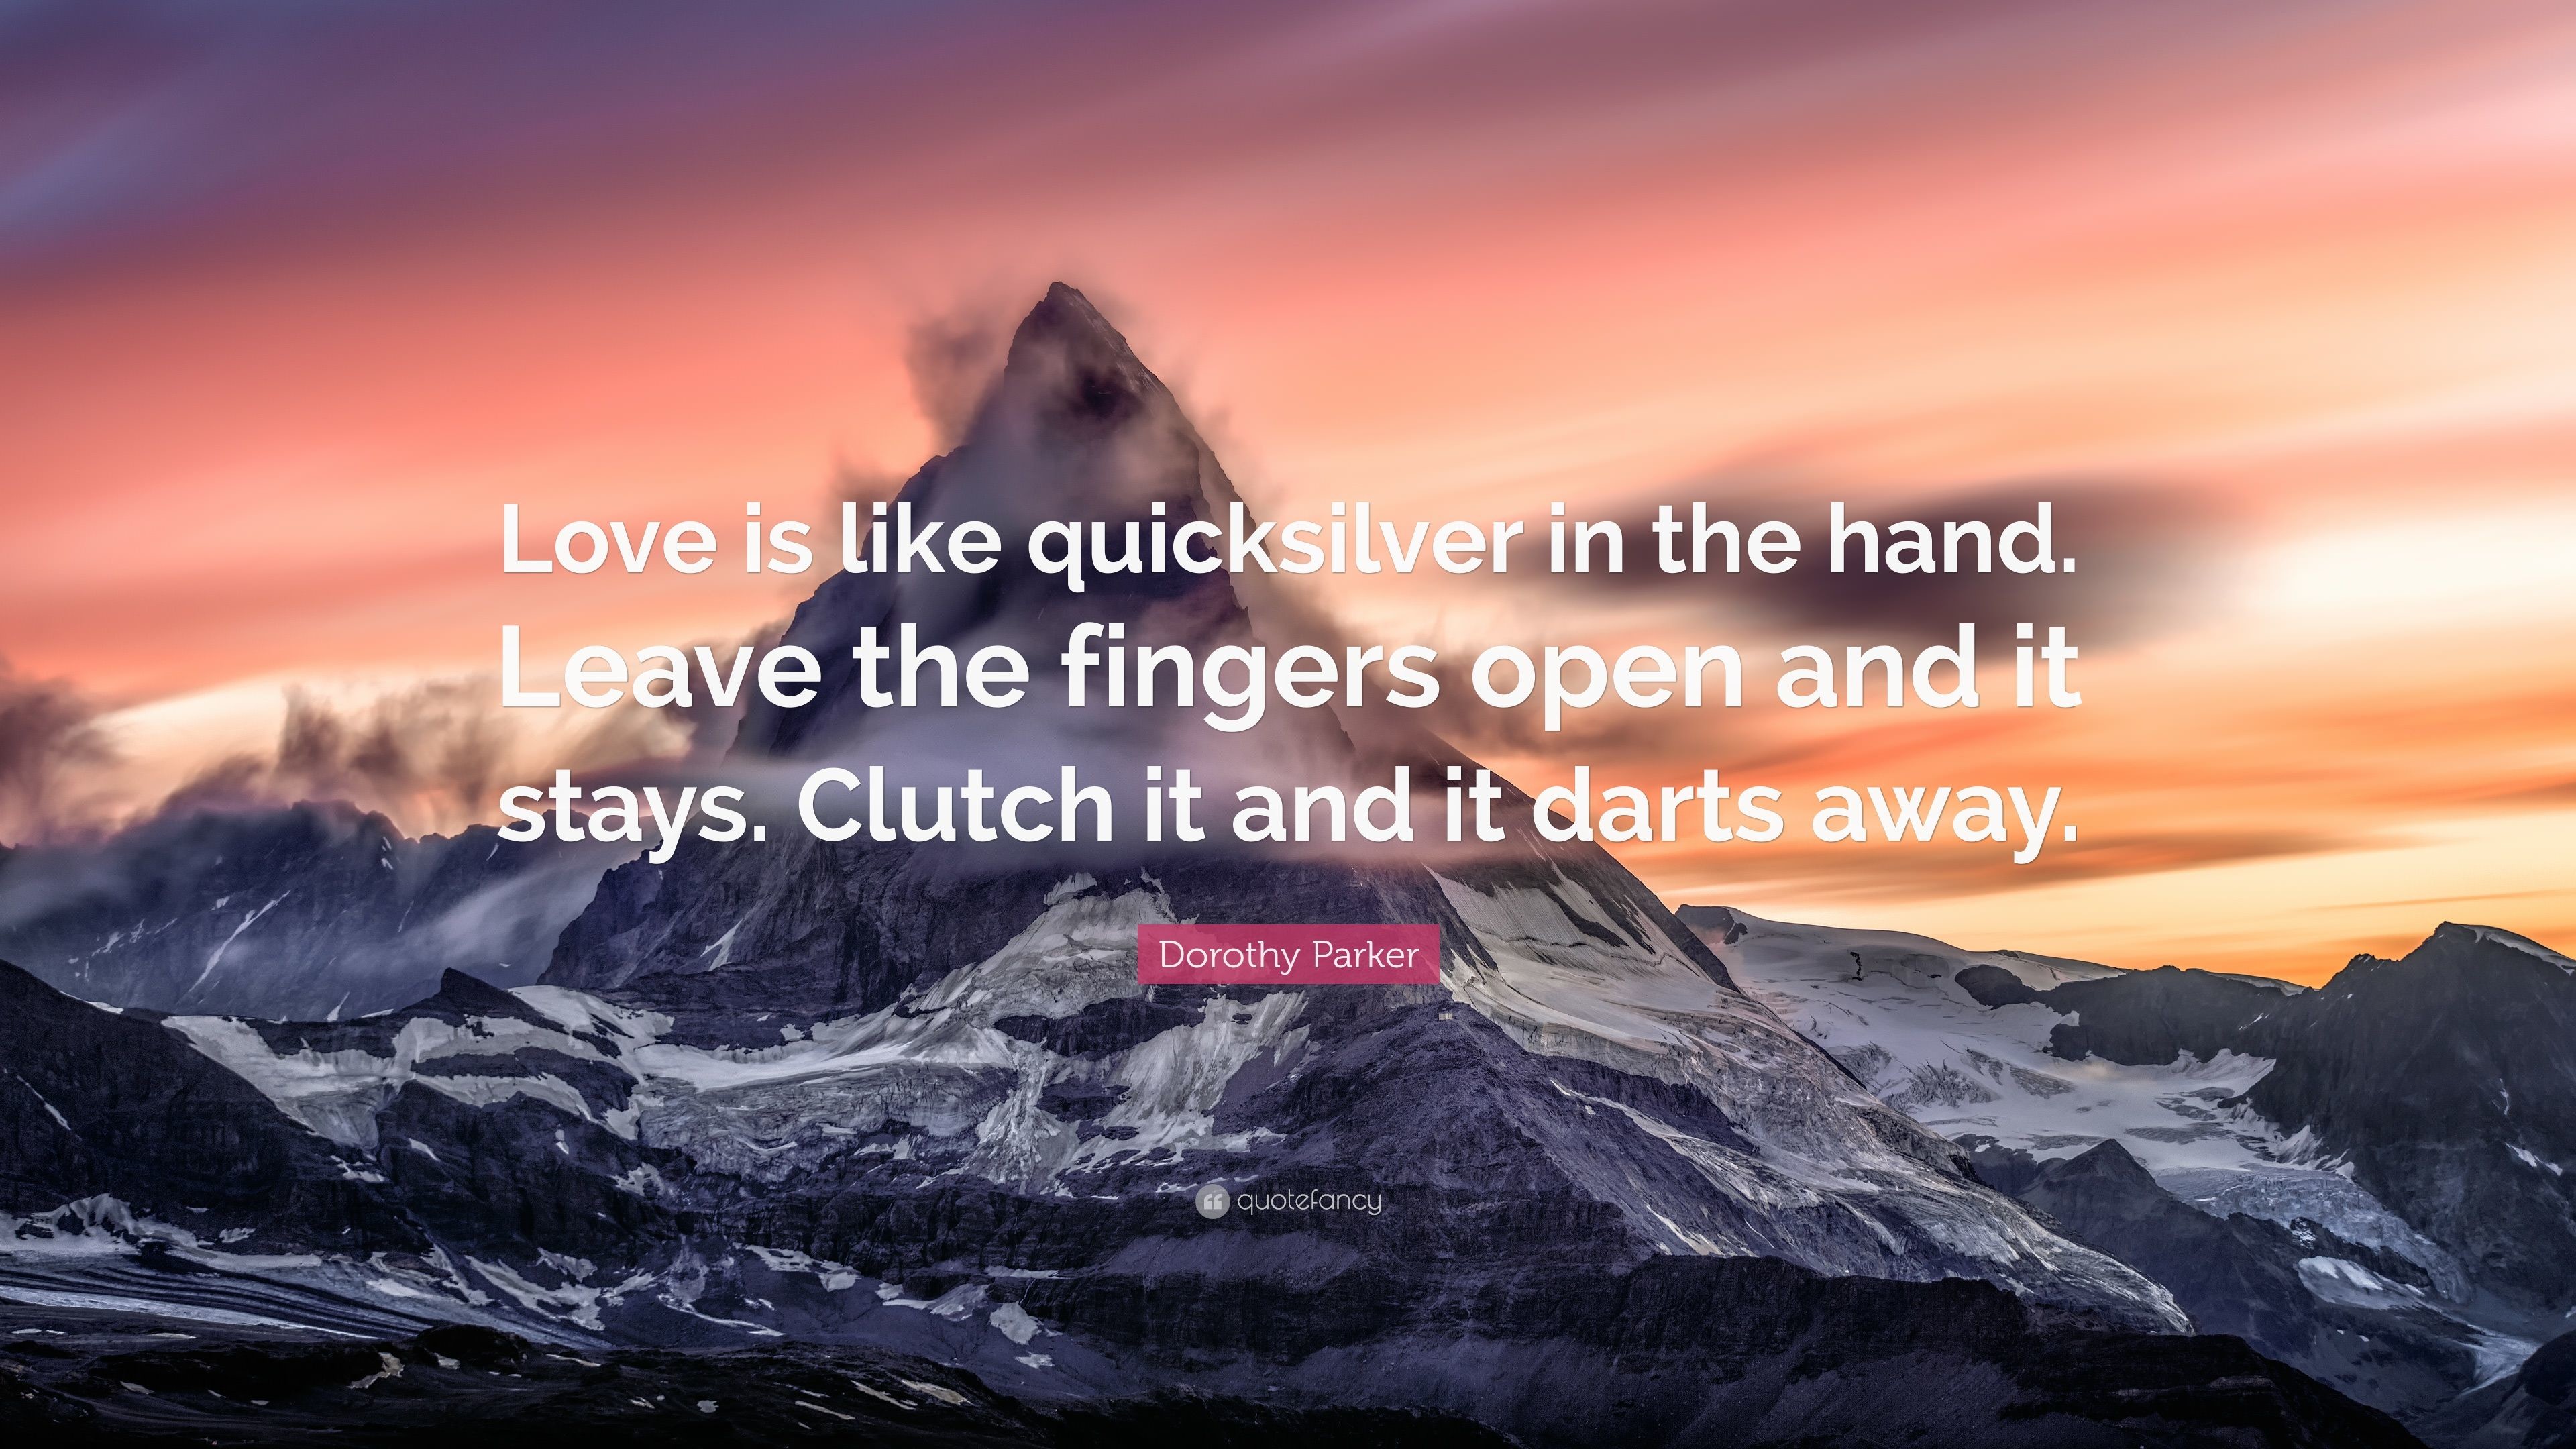 3840x2160 Dorothy Parker Quote: “Love is like quicksilver in the hand. Leave the  fingers